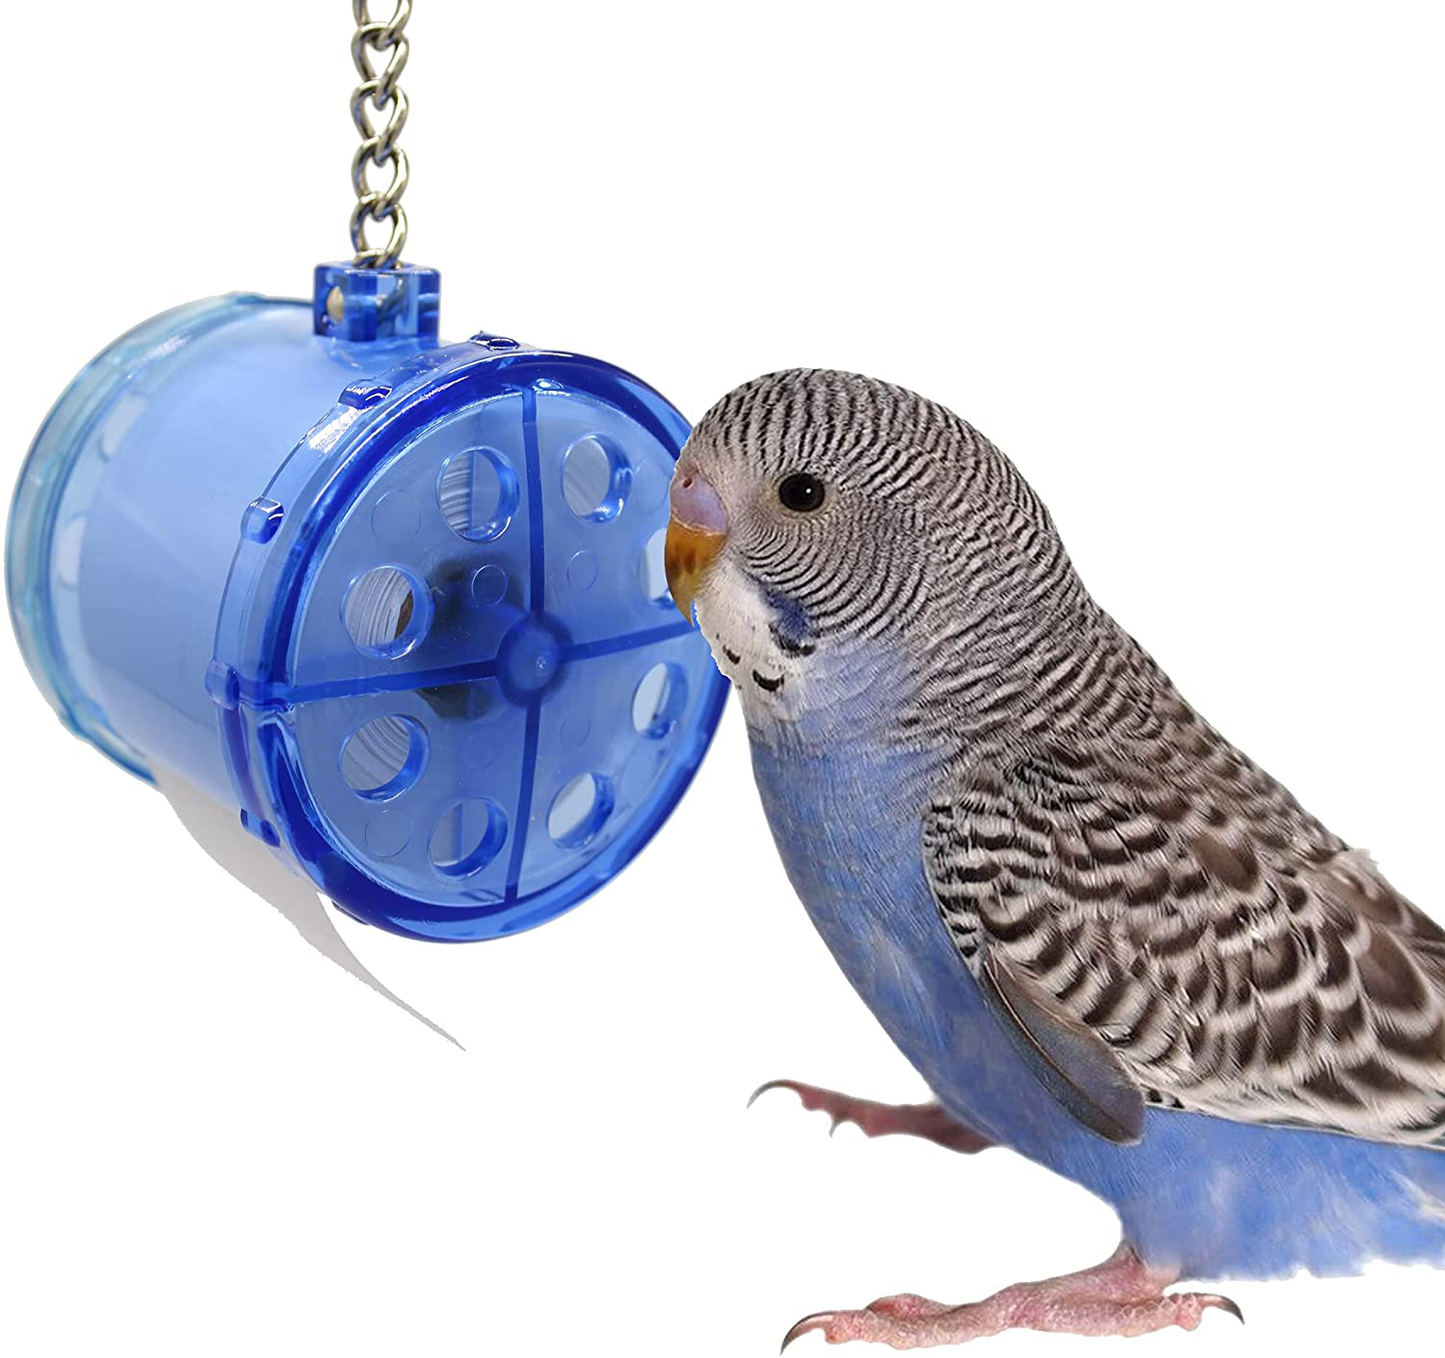 Sweet Feet & Beak Shred Master - Perfect Bird Cage Toy for All Birds - Shredding & Engagement - Safe, Non-Toxic, Easy to Install Parrot Cage Accessories